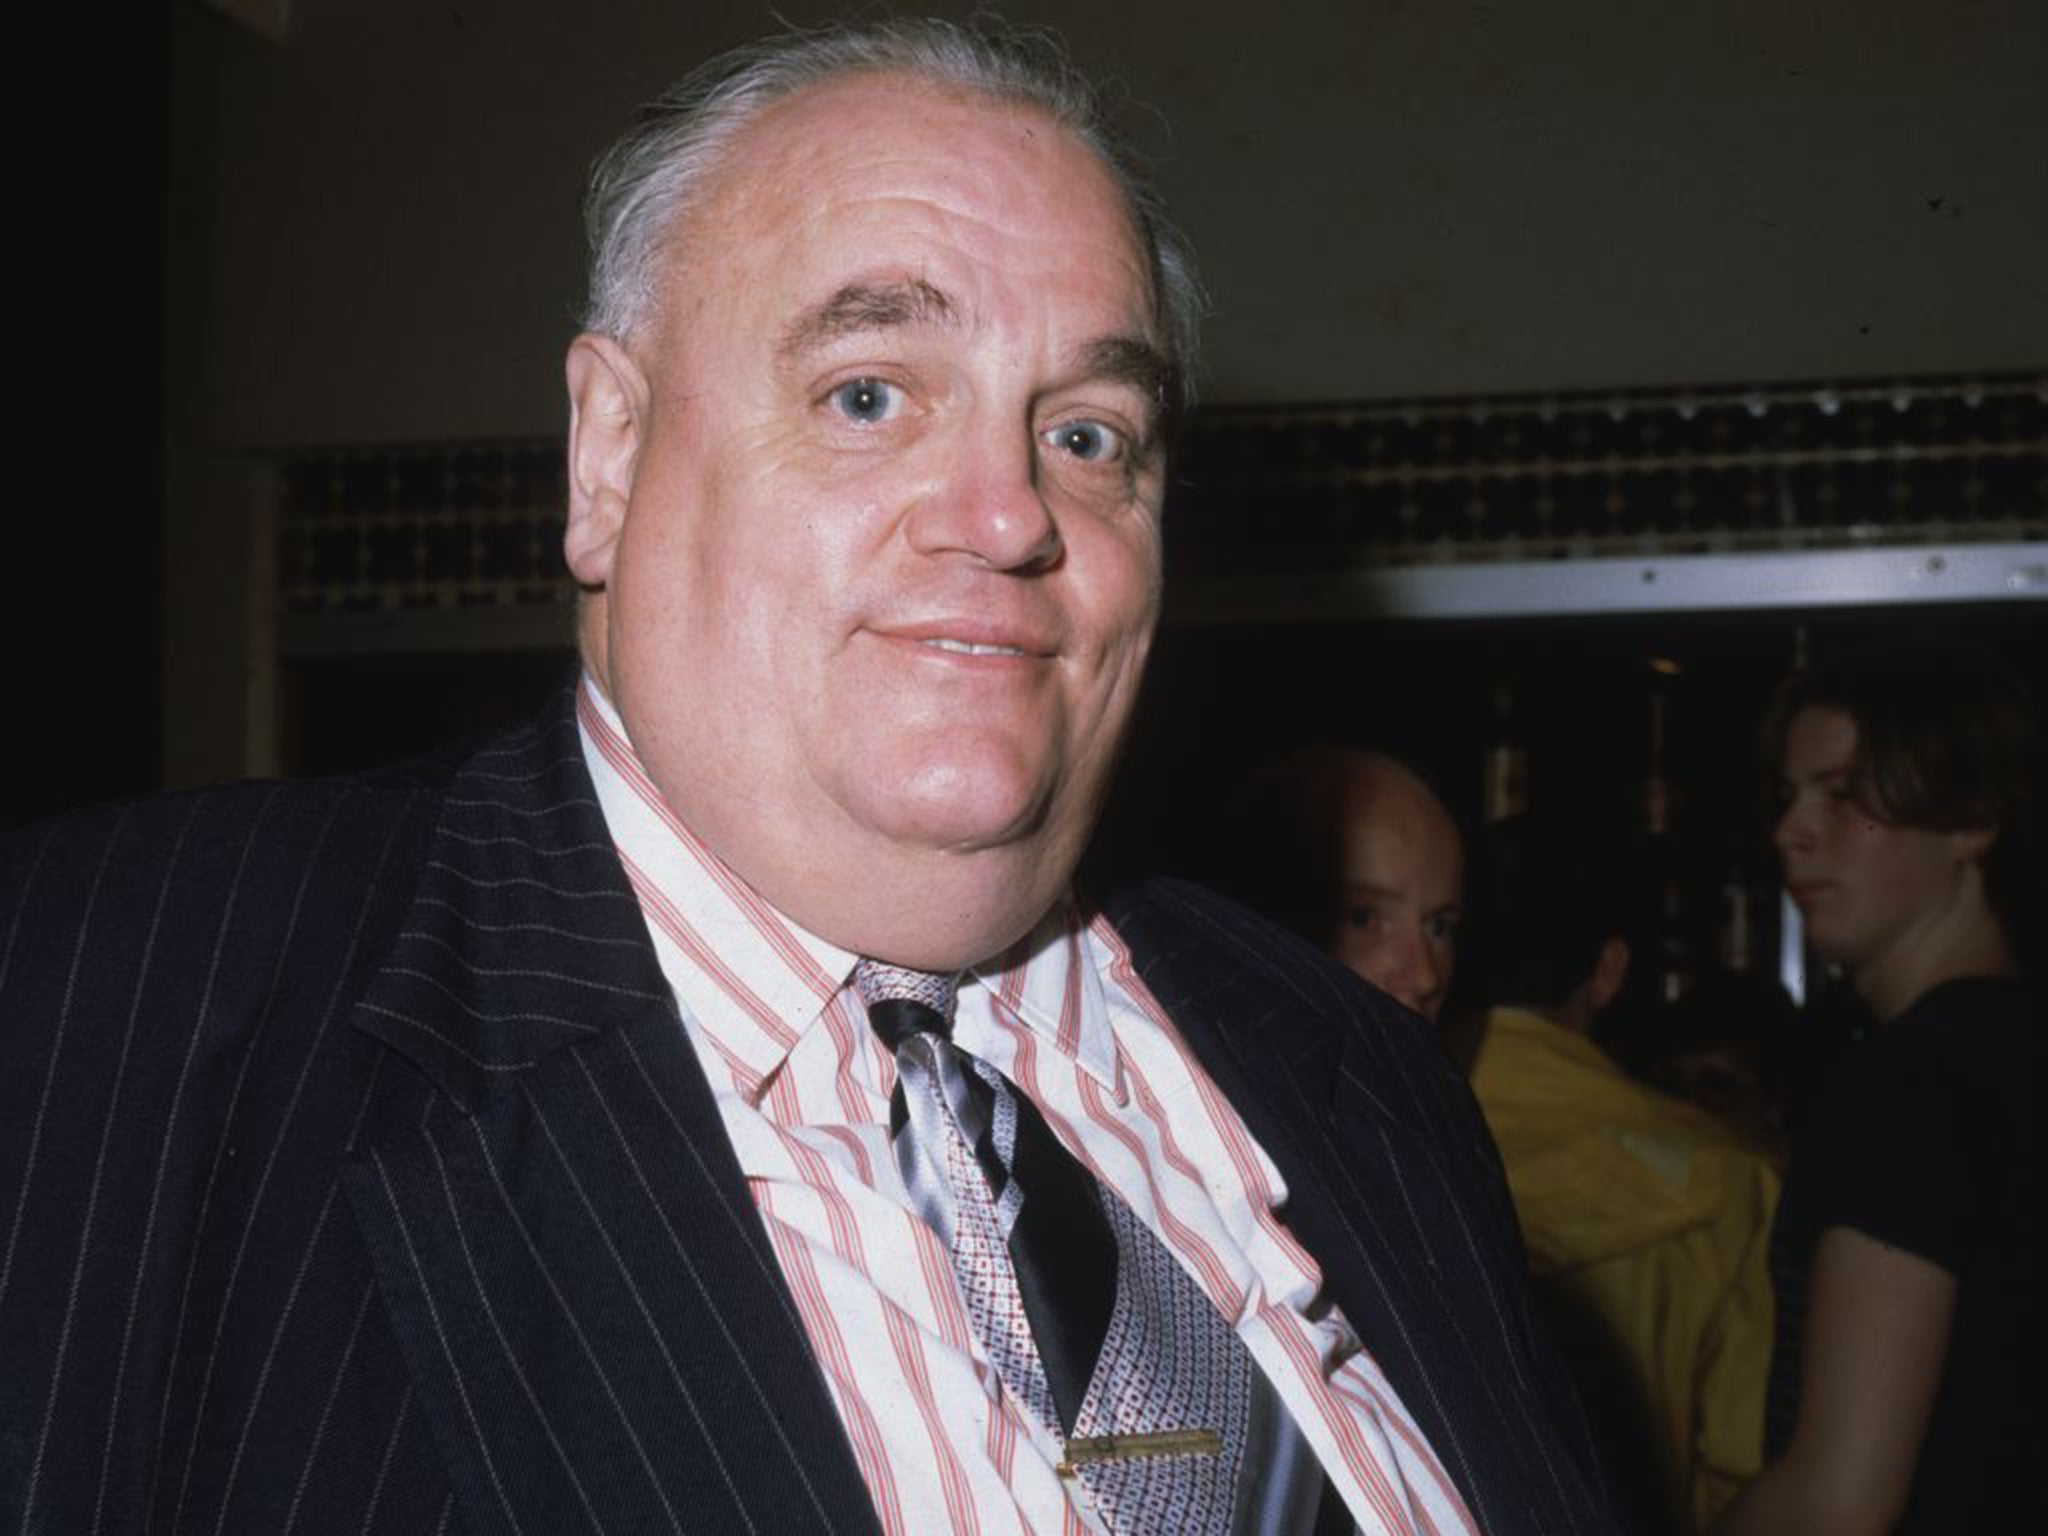 A botched attempt by South African intelligence to blackmail Cyril Smith over his sexual abuse of boys may have helped the politician escape justice